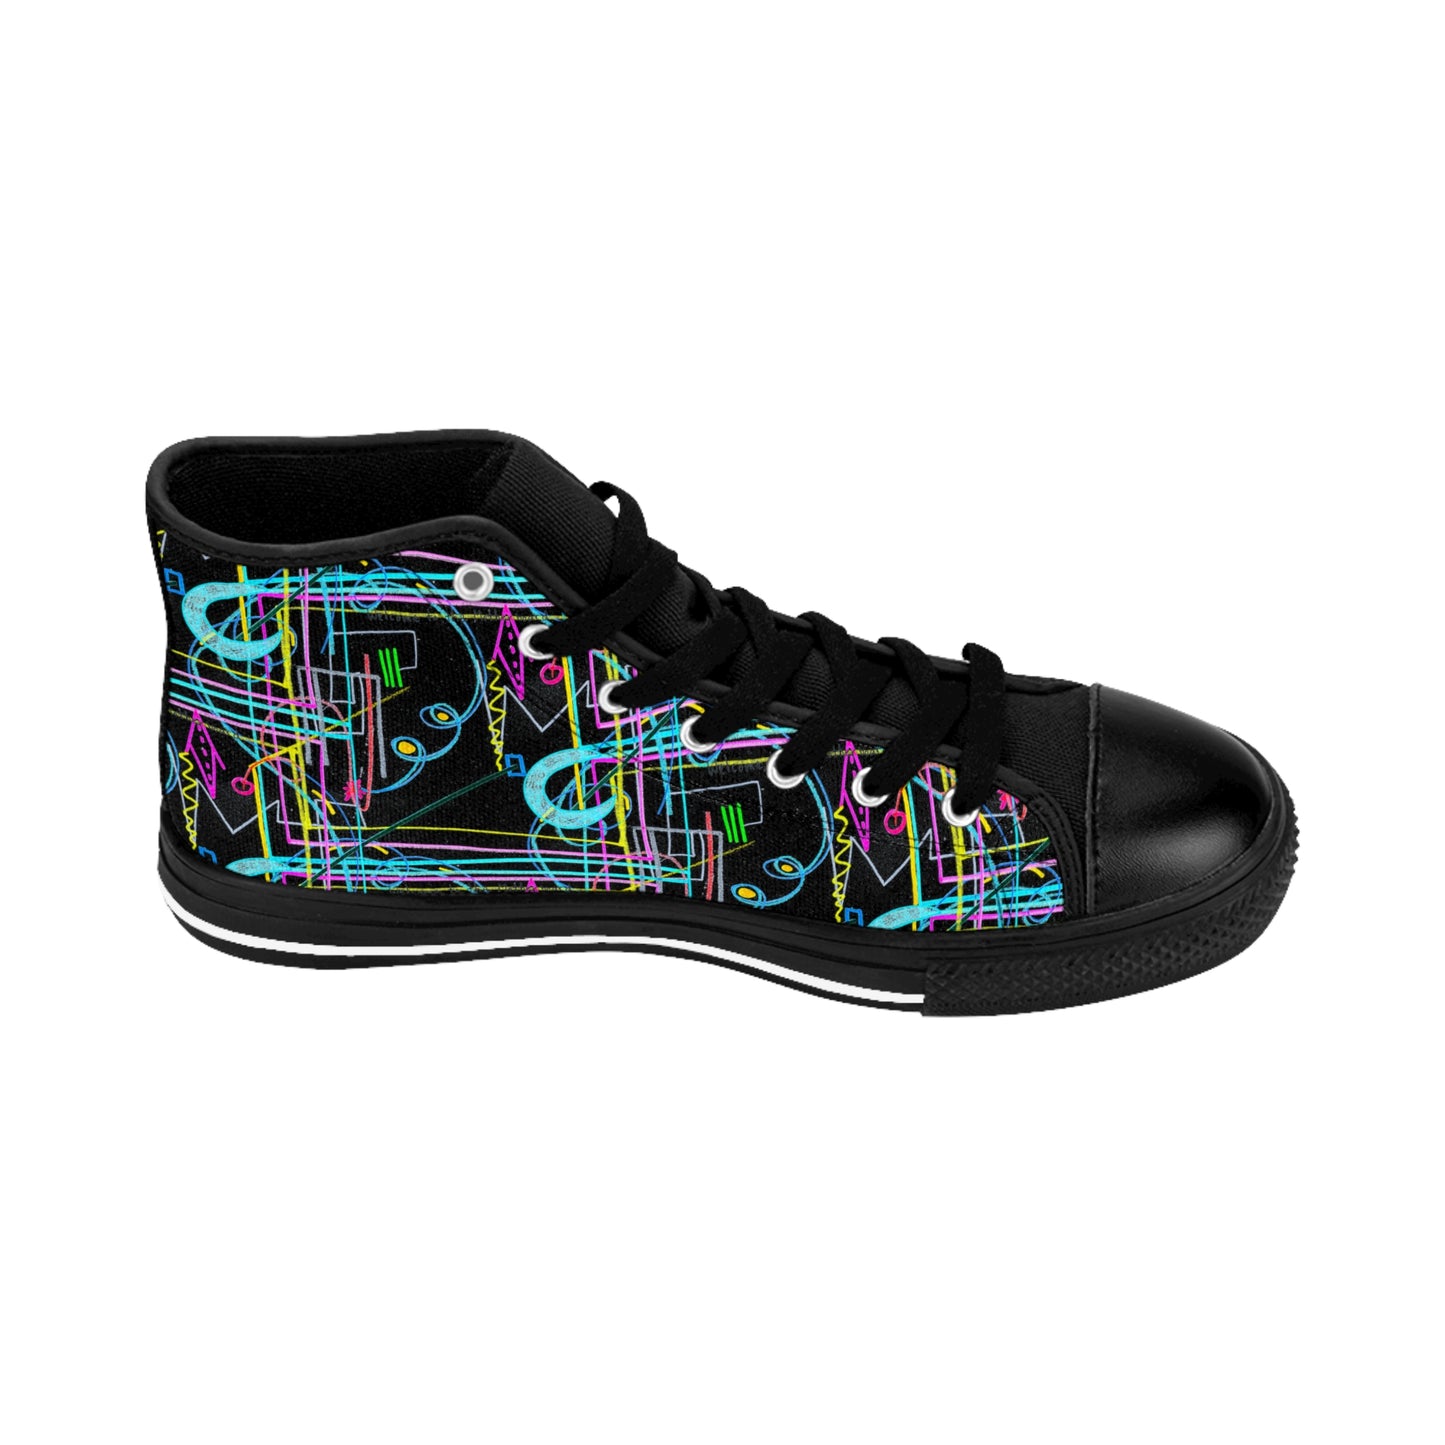 All Horizons, masculine high-top sneakers